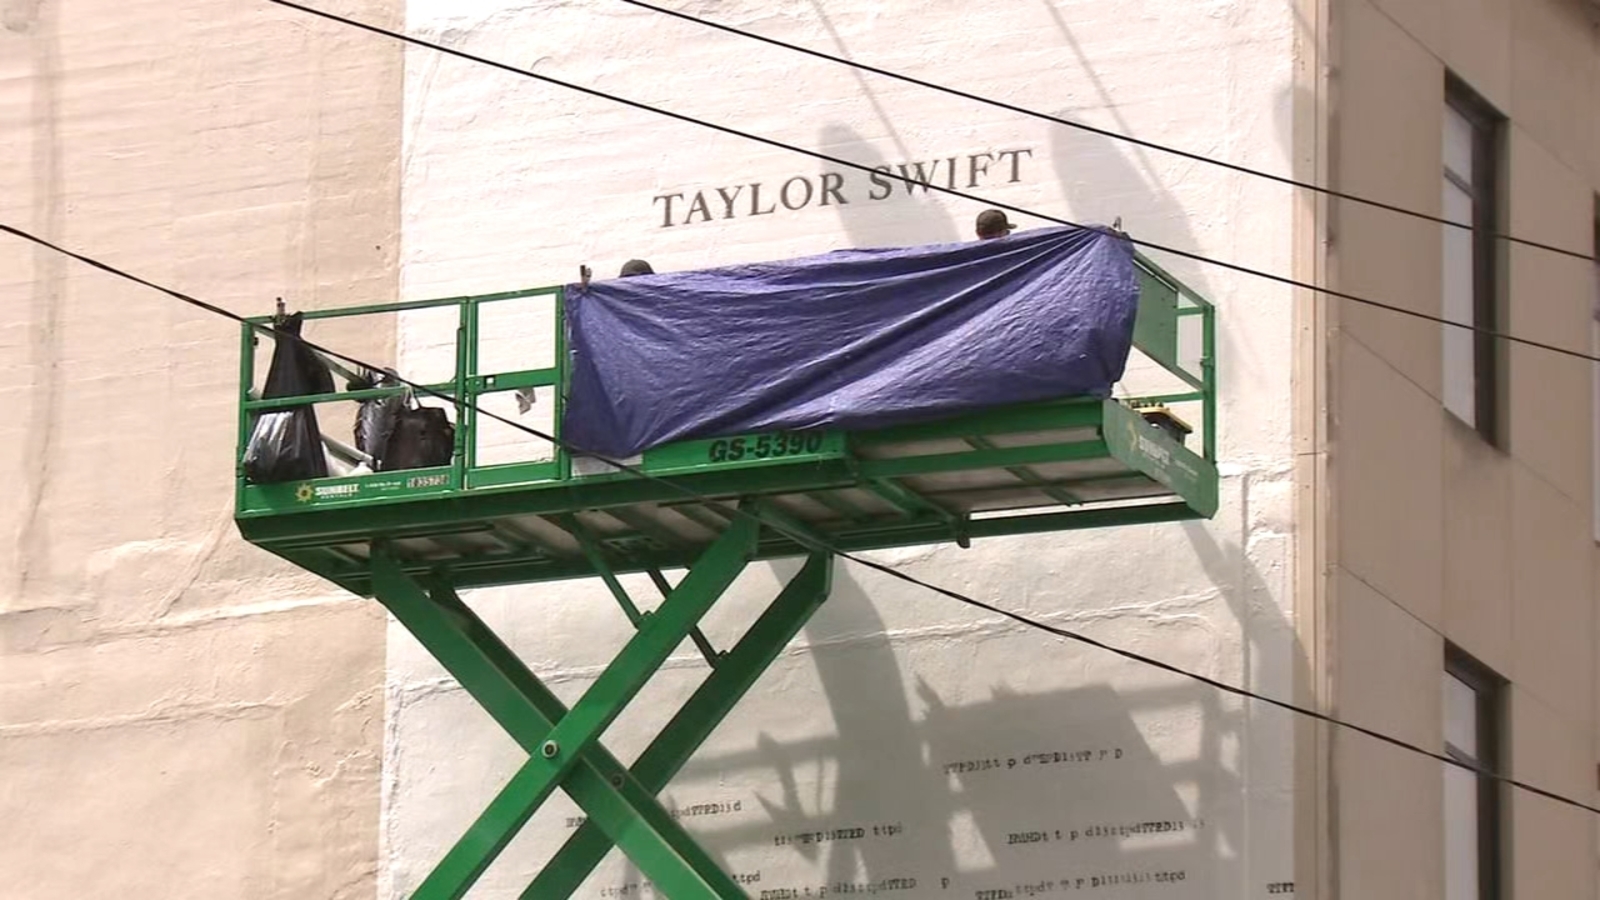 Taylor Swifts mysterious QR code with a link to a strange page appears on Chicago building